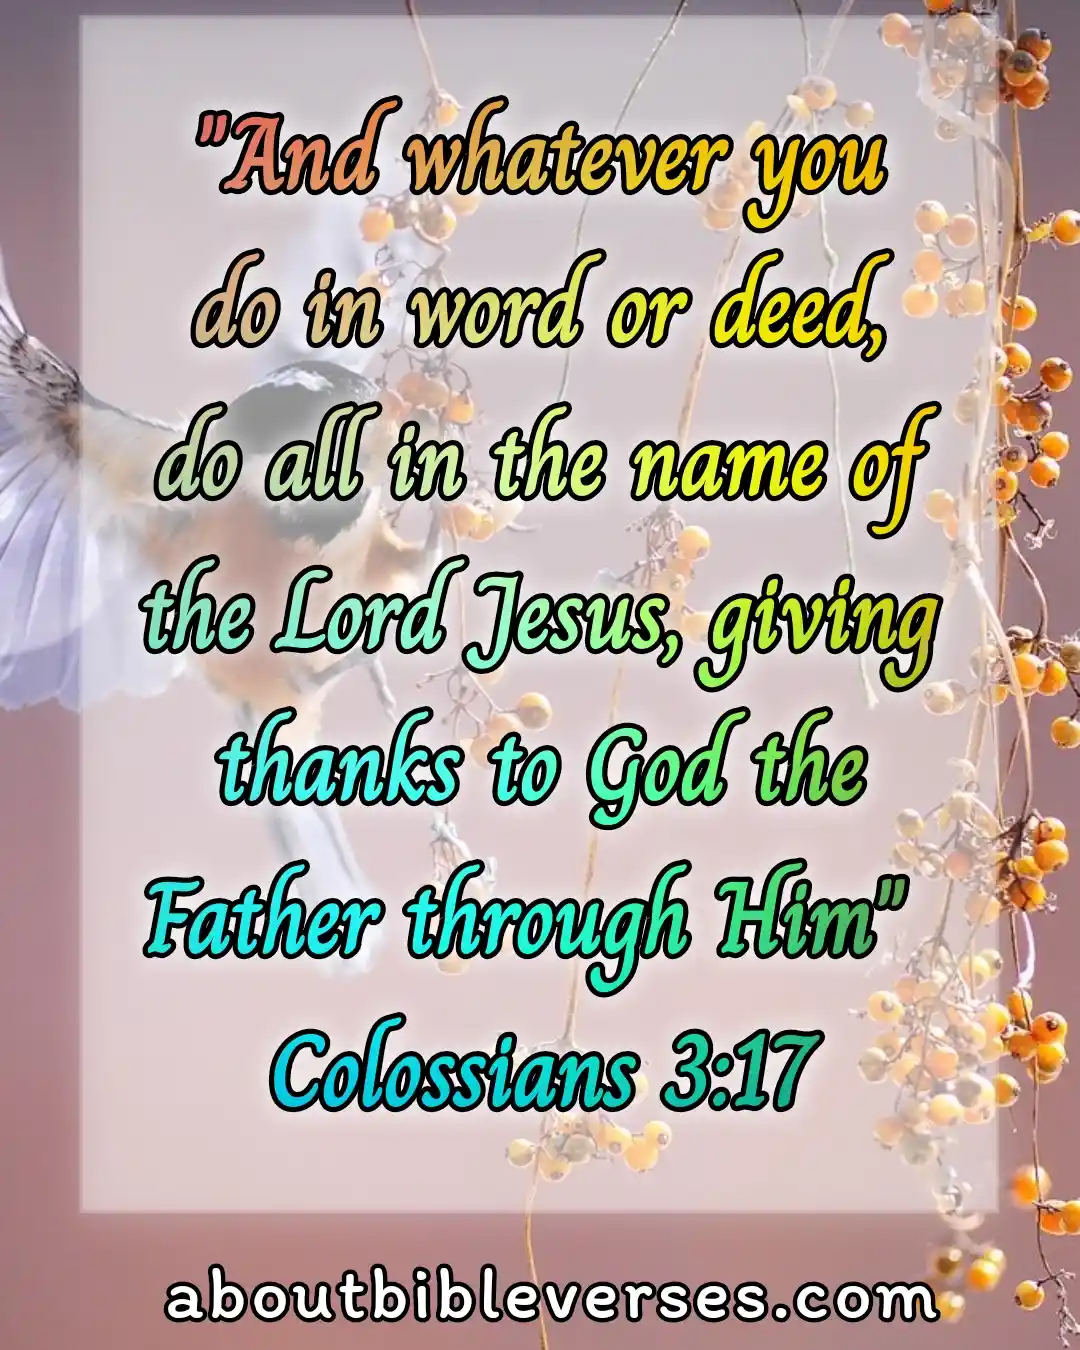 Bible Verses About Giving Thanks To God (Colossians 3:17)